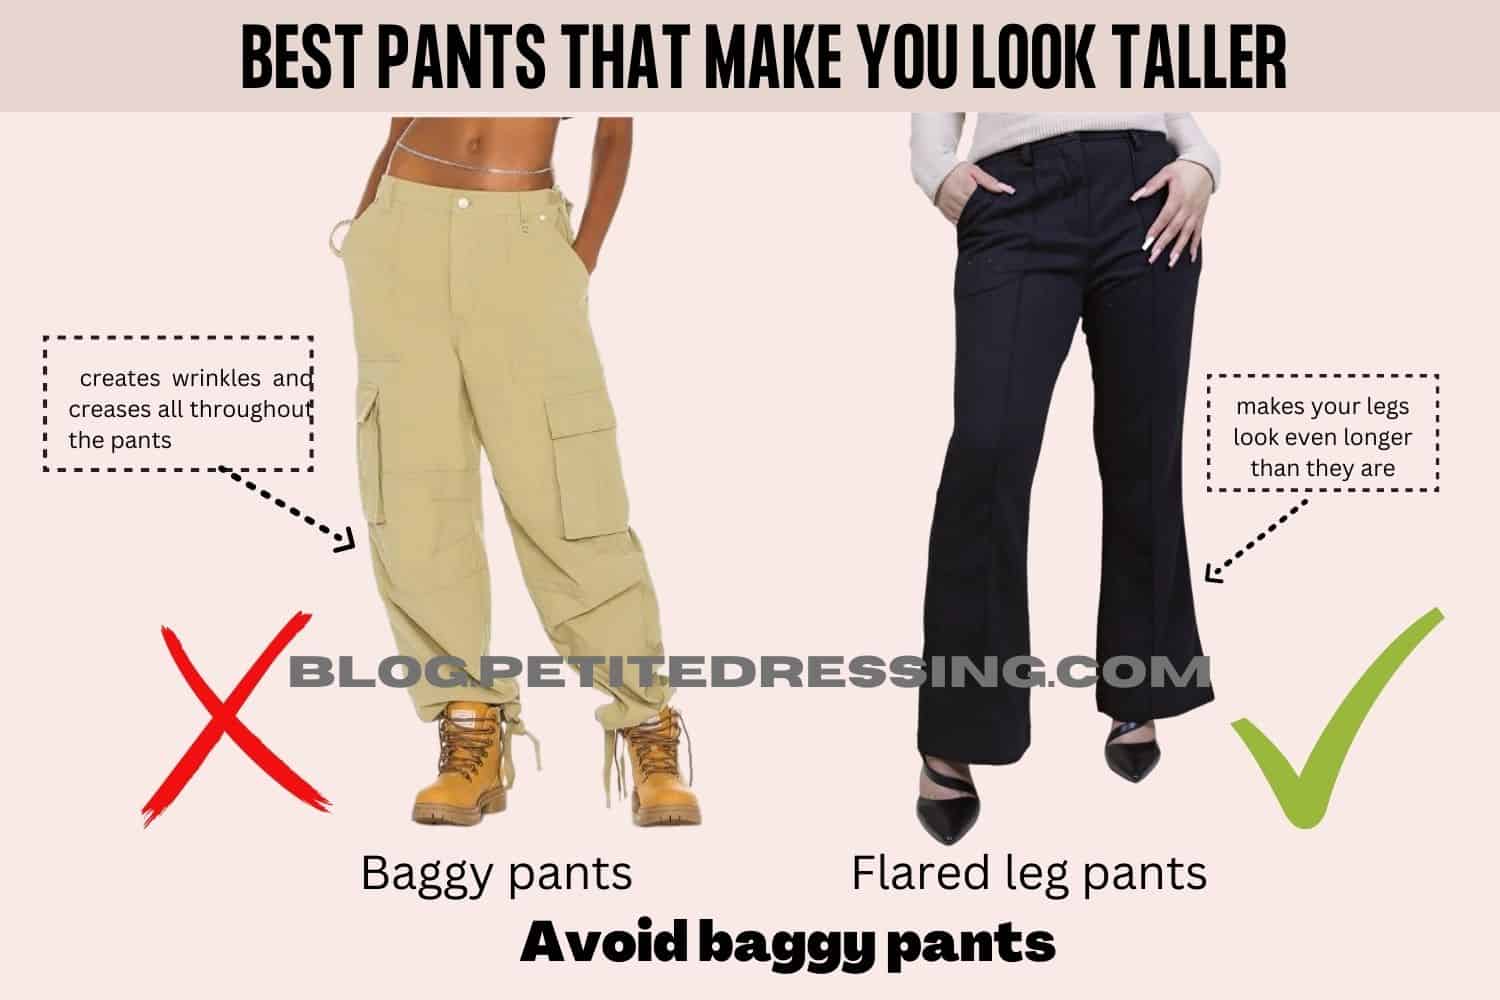 What Types of Pants Make You Look Taller